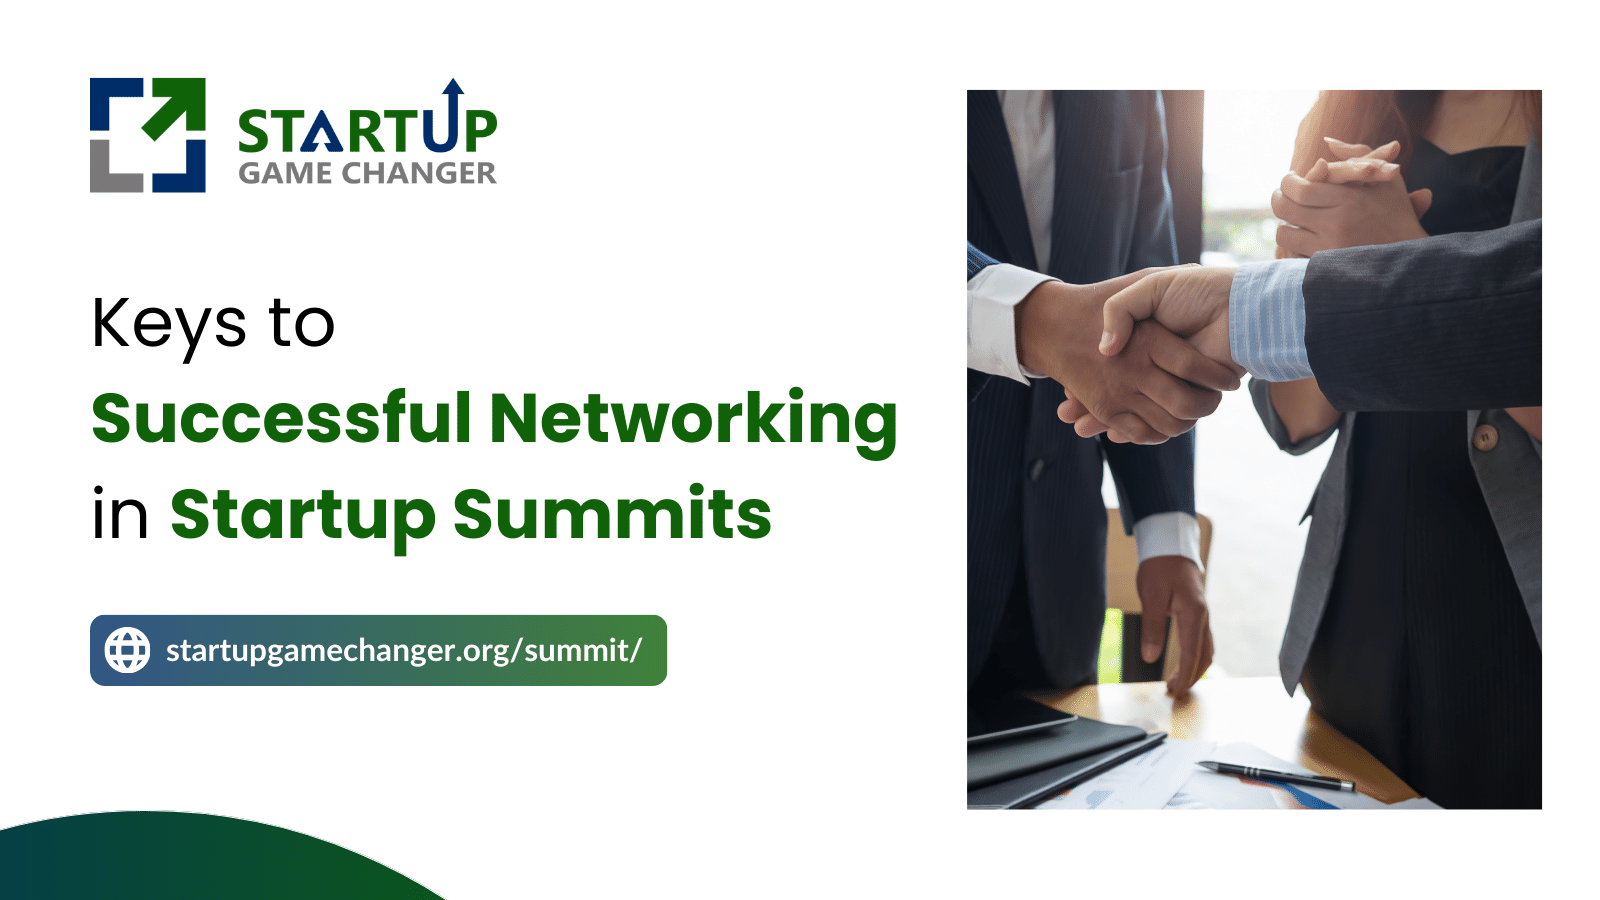 Keys to Successful Networking in Startup Summits